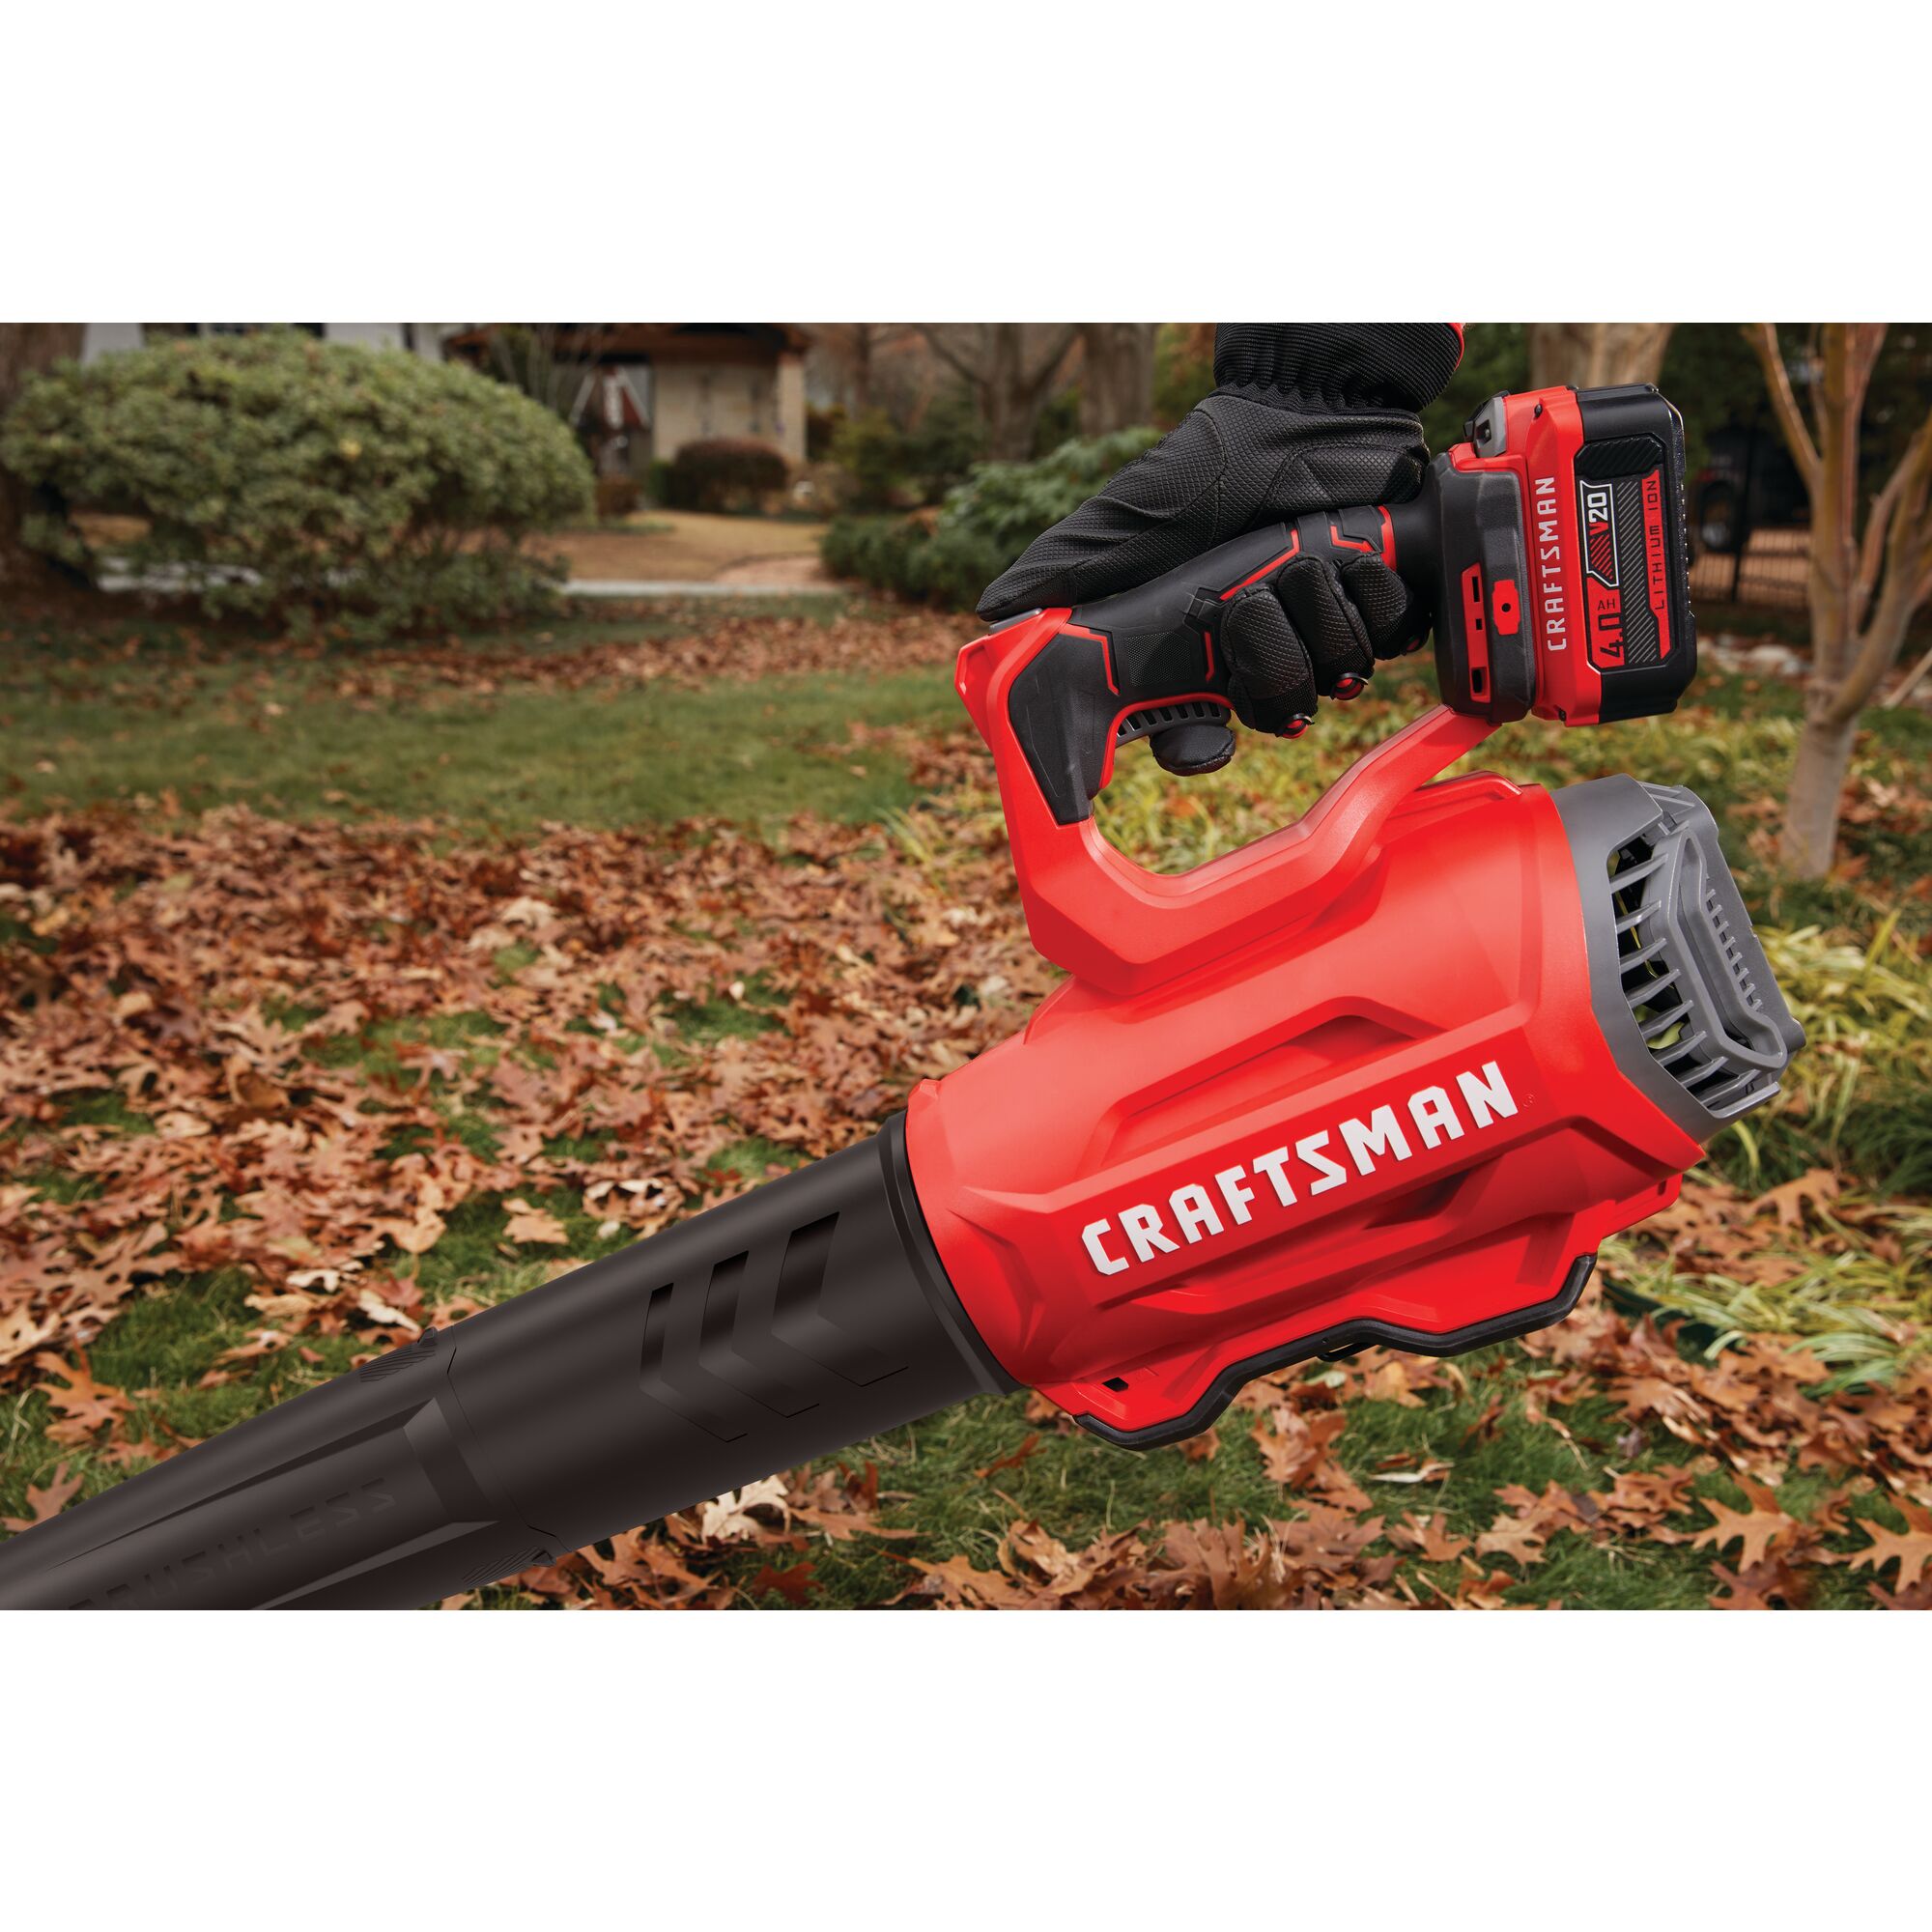 Lightweight and compact design feature of brushless cordless axial blower kit 4 amp hour.